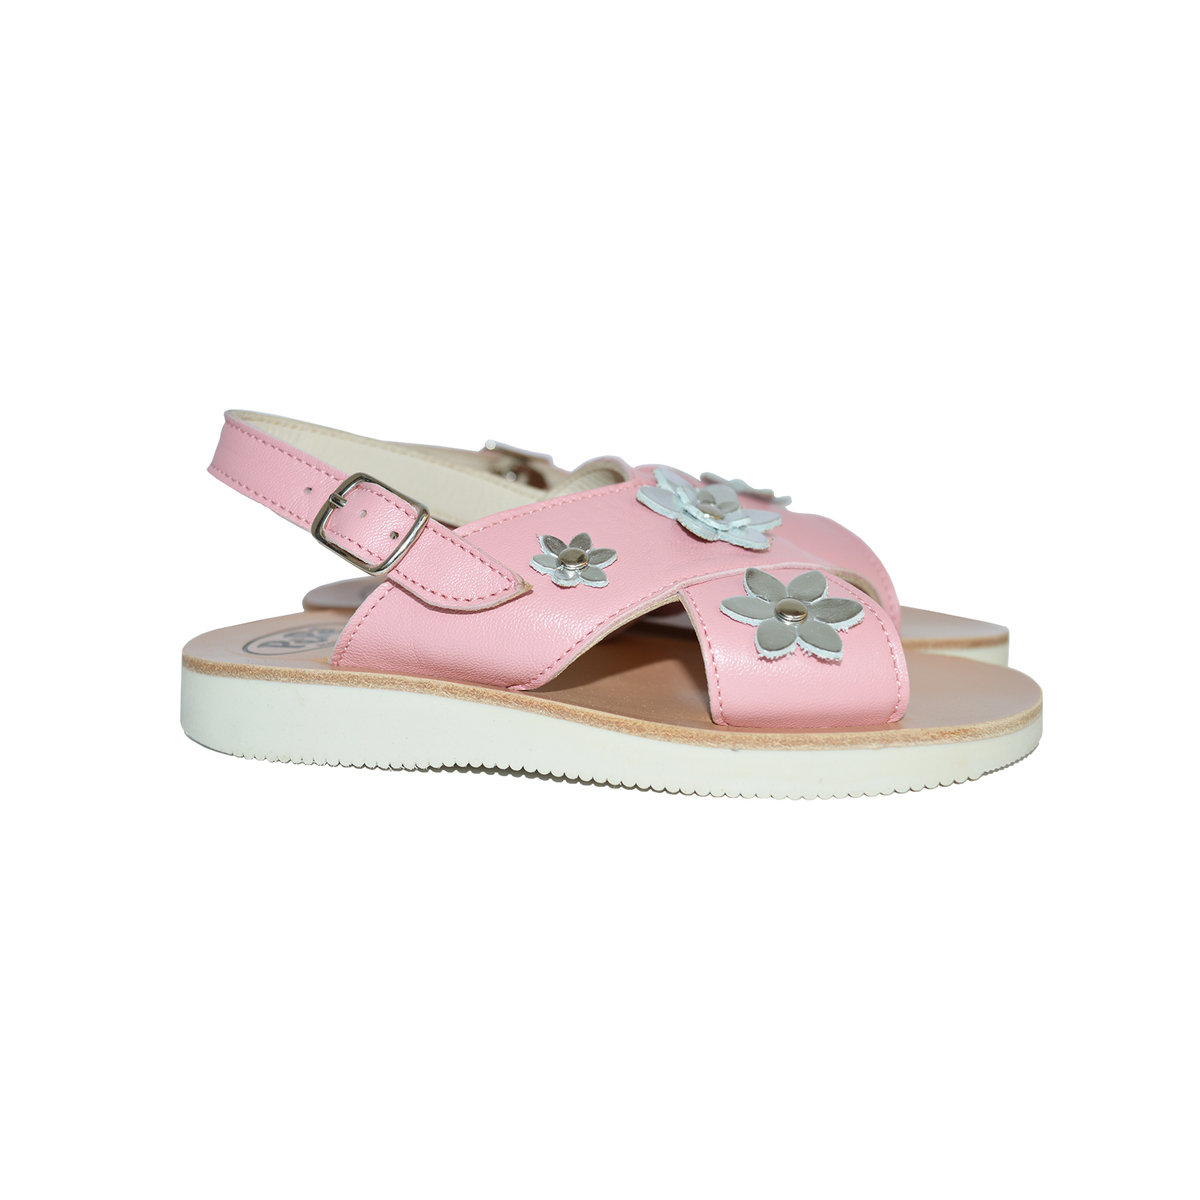 Leather Sandals with Embellished Flower | Pepe Shoes Footwears Outlet |  Angelibebe